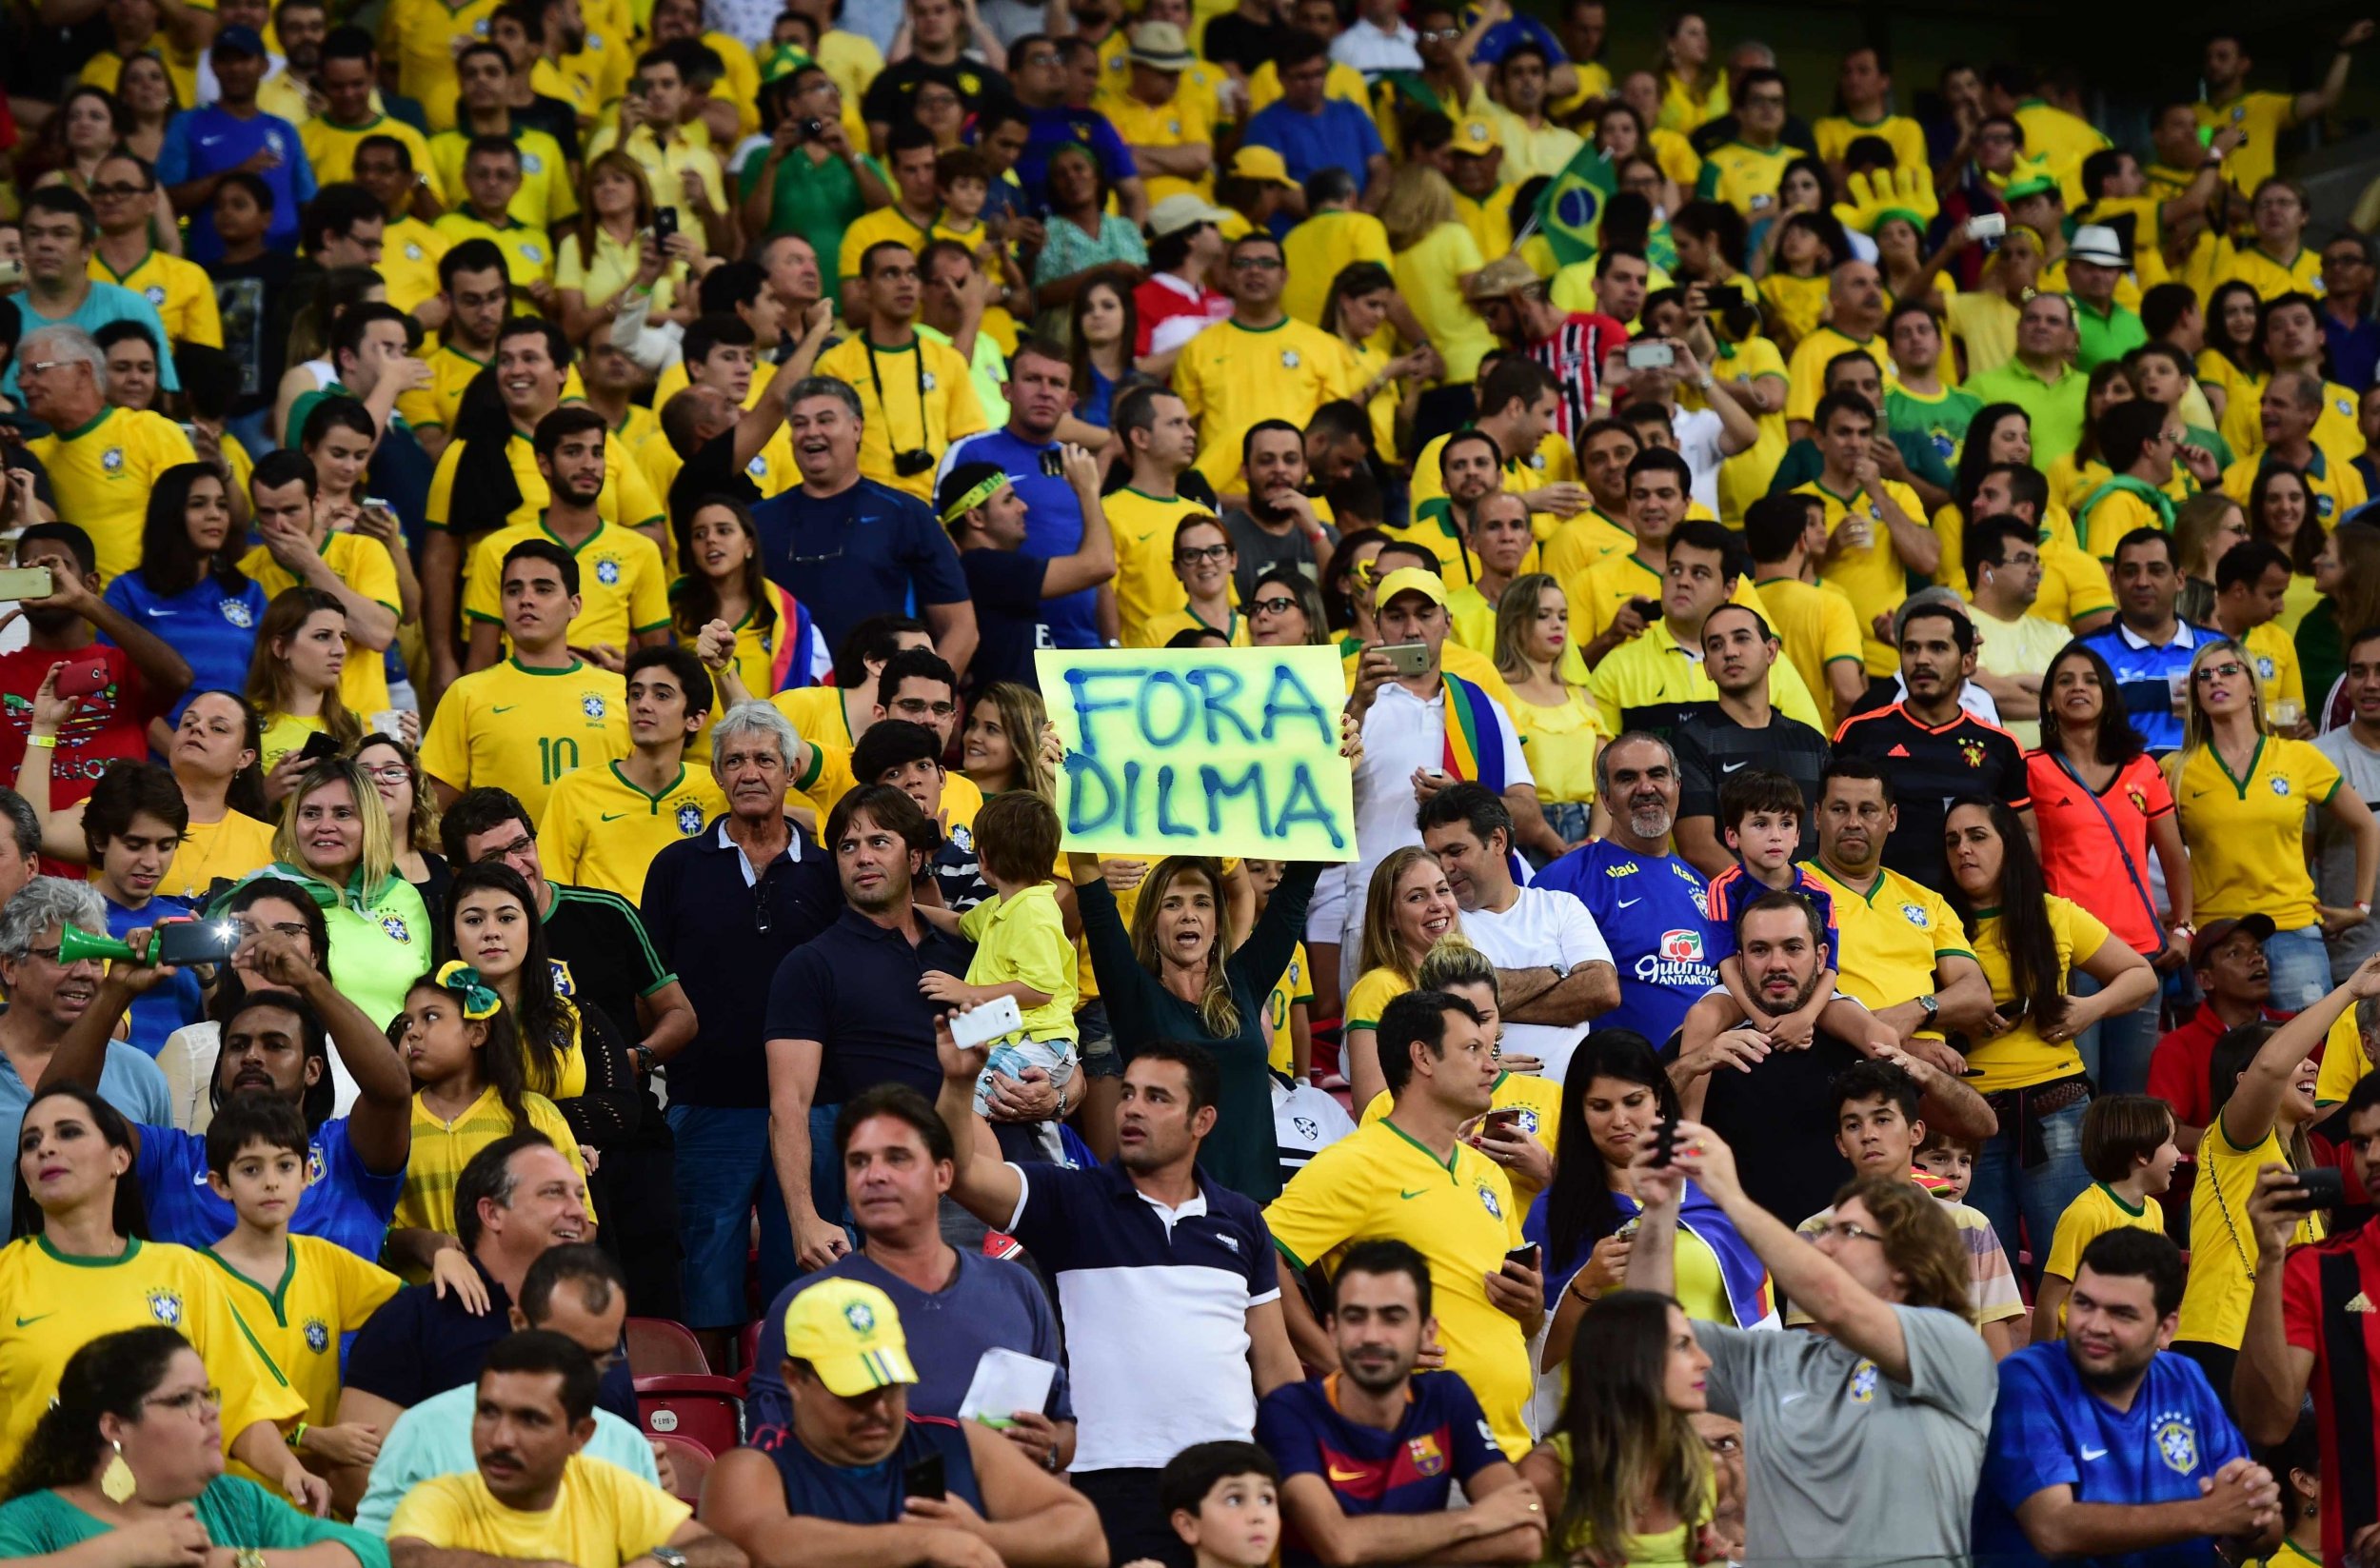 In Brazil, as soccer goes, so goes the nation